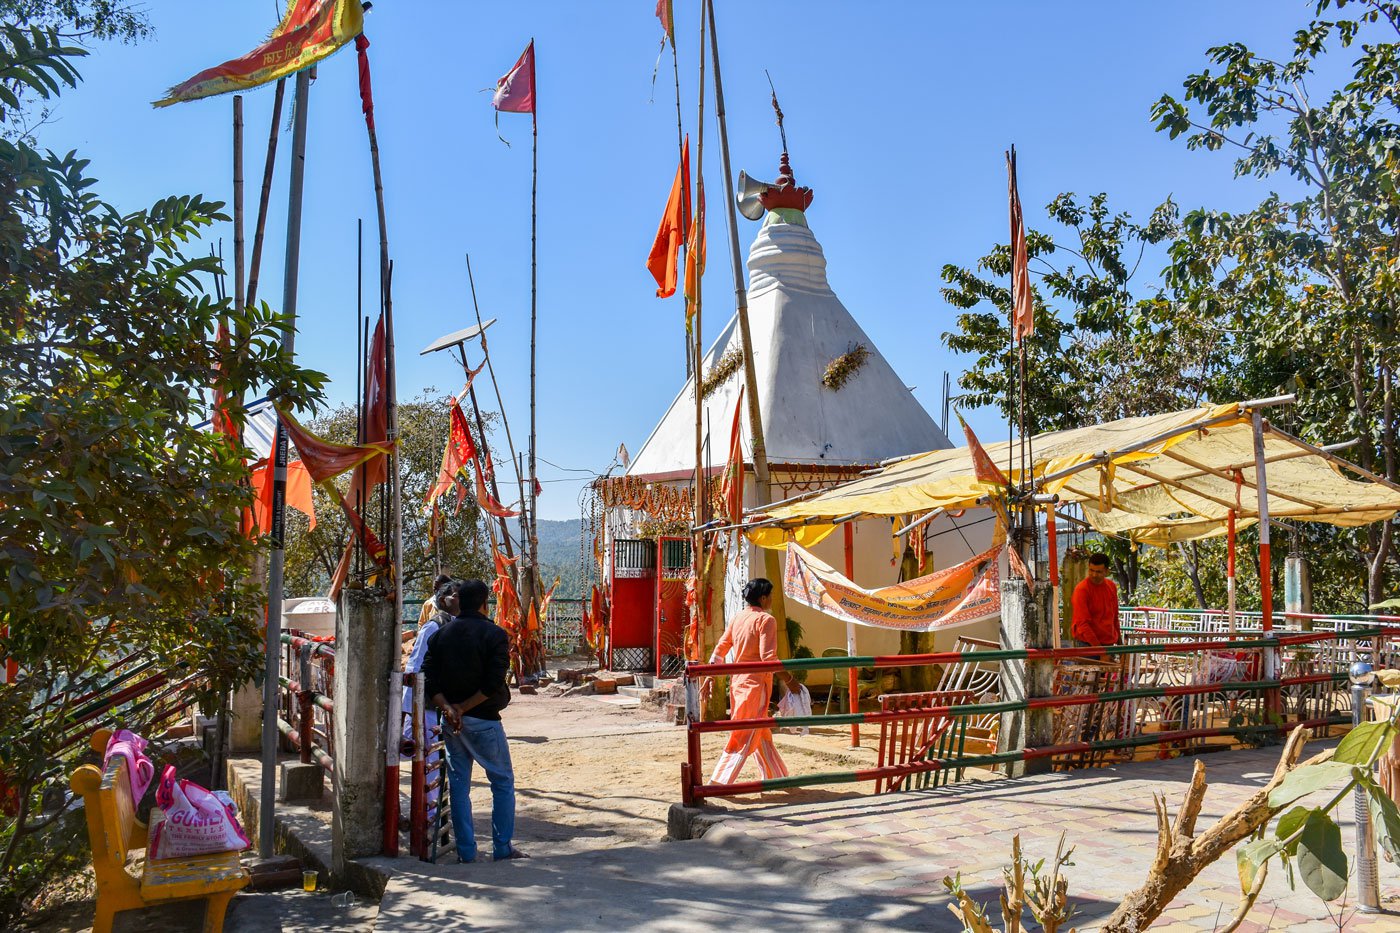 The Hanuman temple on the mountain that is now called Anjan Dham